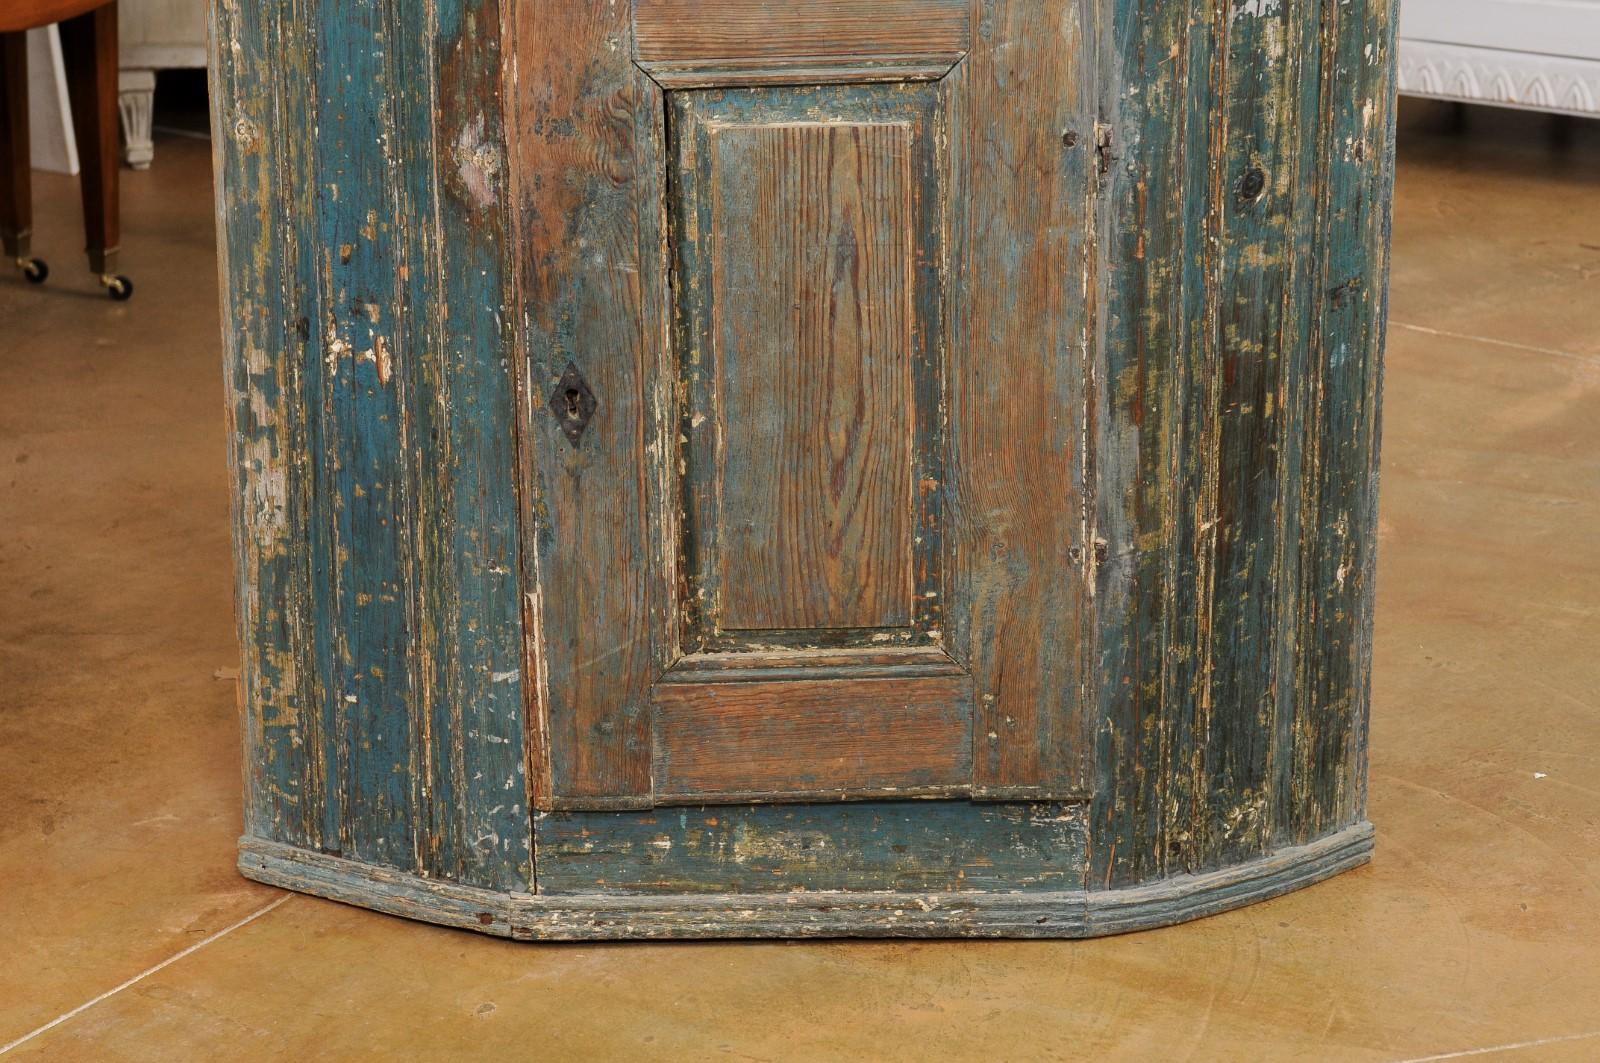 A Swedish Gustavian period painted wood wall hanging corner cabinet from the late 18th century, with blue paint, single door and weathered appearance. Created in Sweden during the last decade of the 18th century, this wall hanging corner cabinet